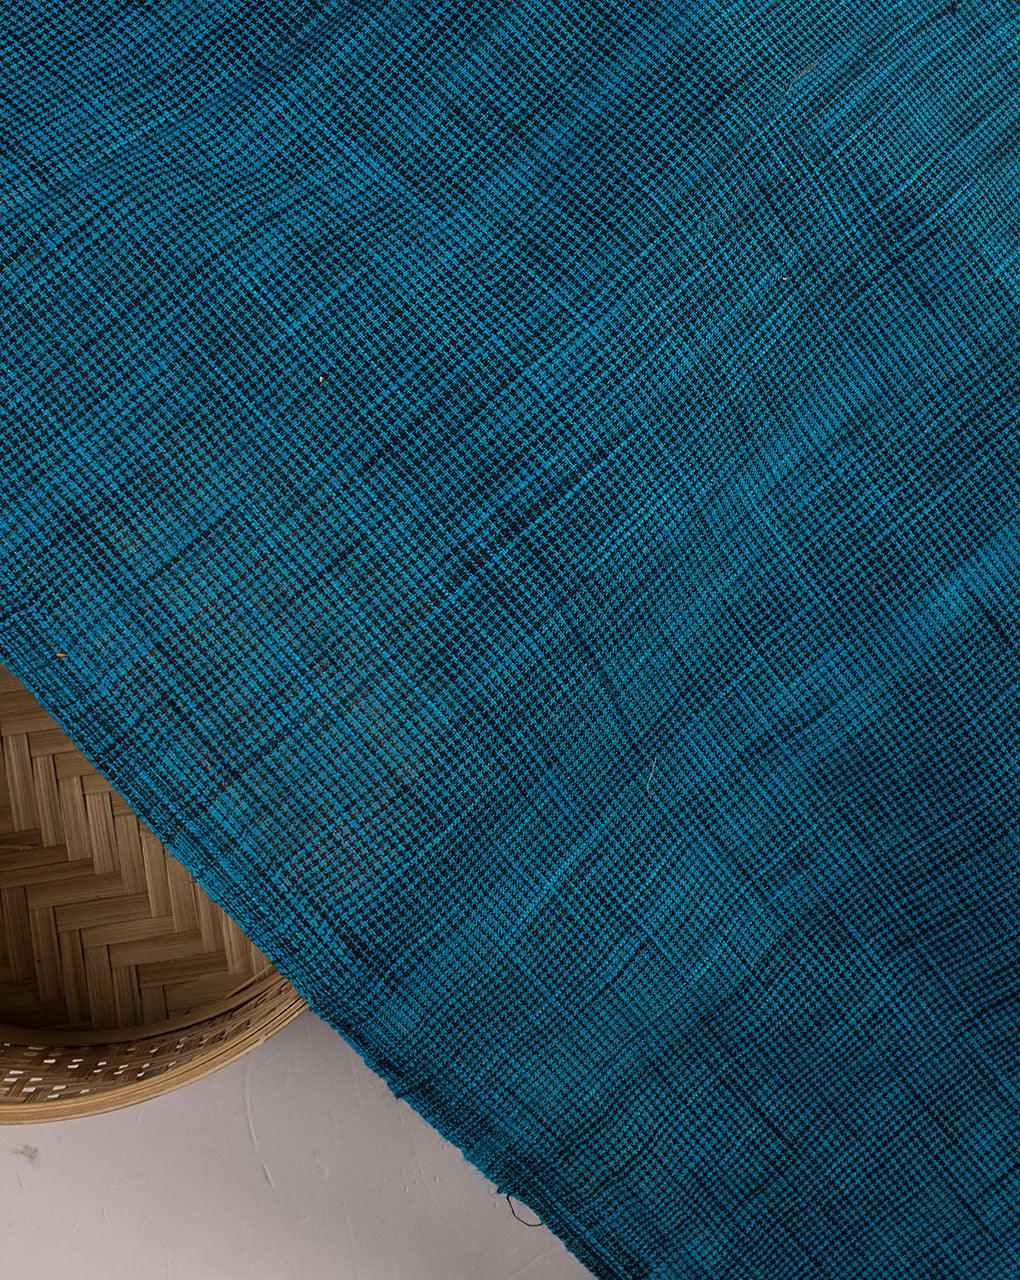 Abstract Loom Textured Cotton Fabric - Fabriclore.com